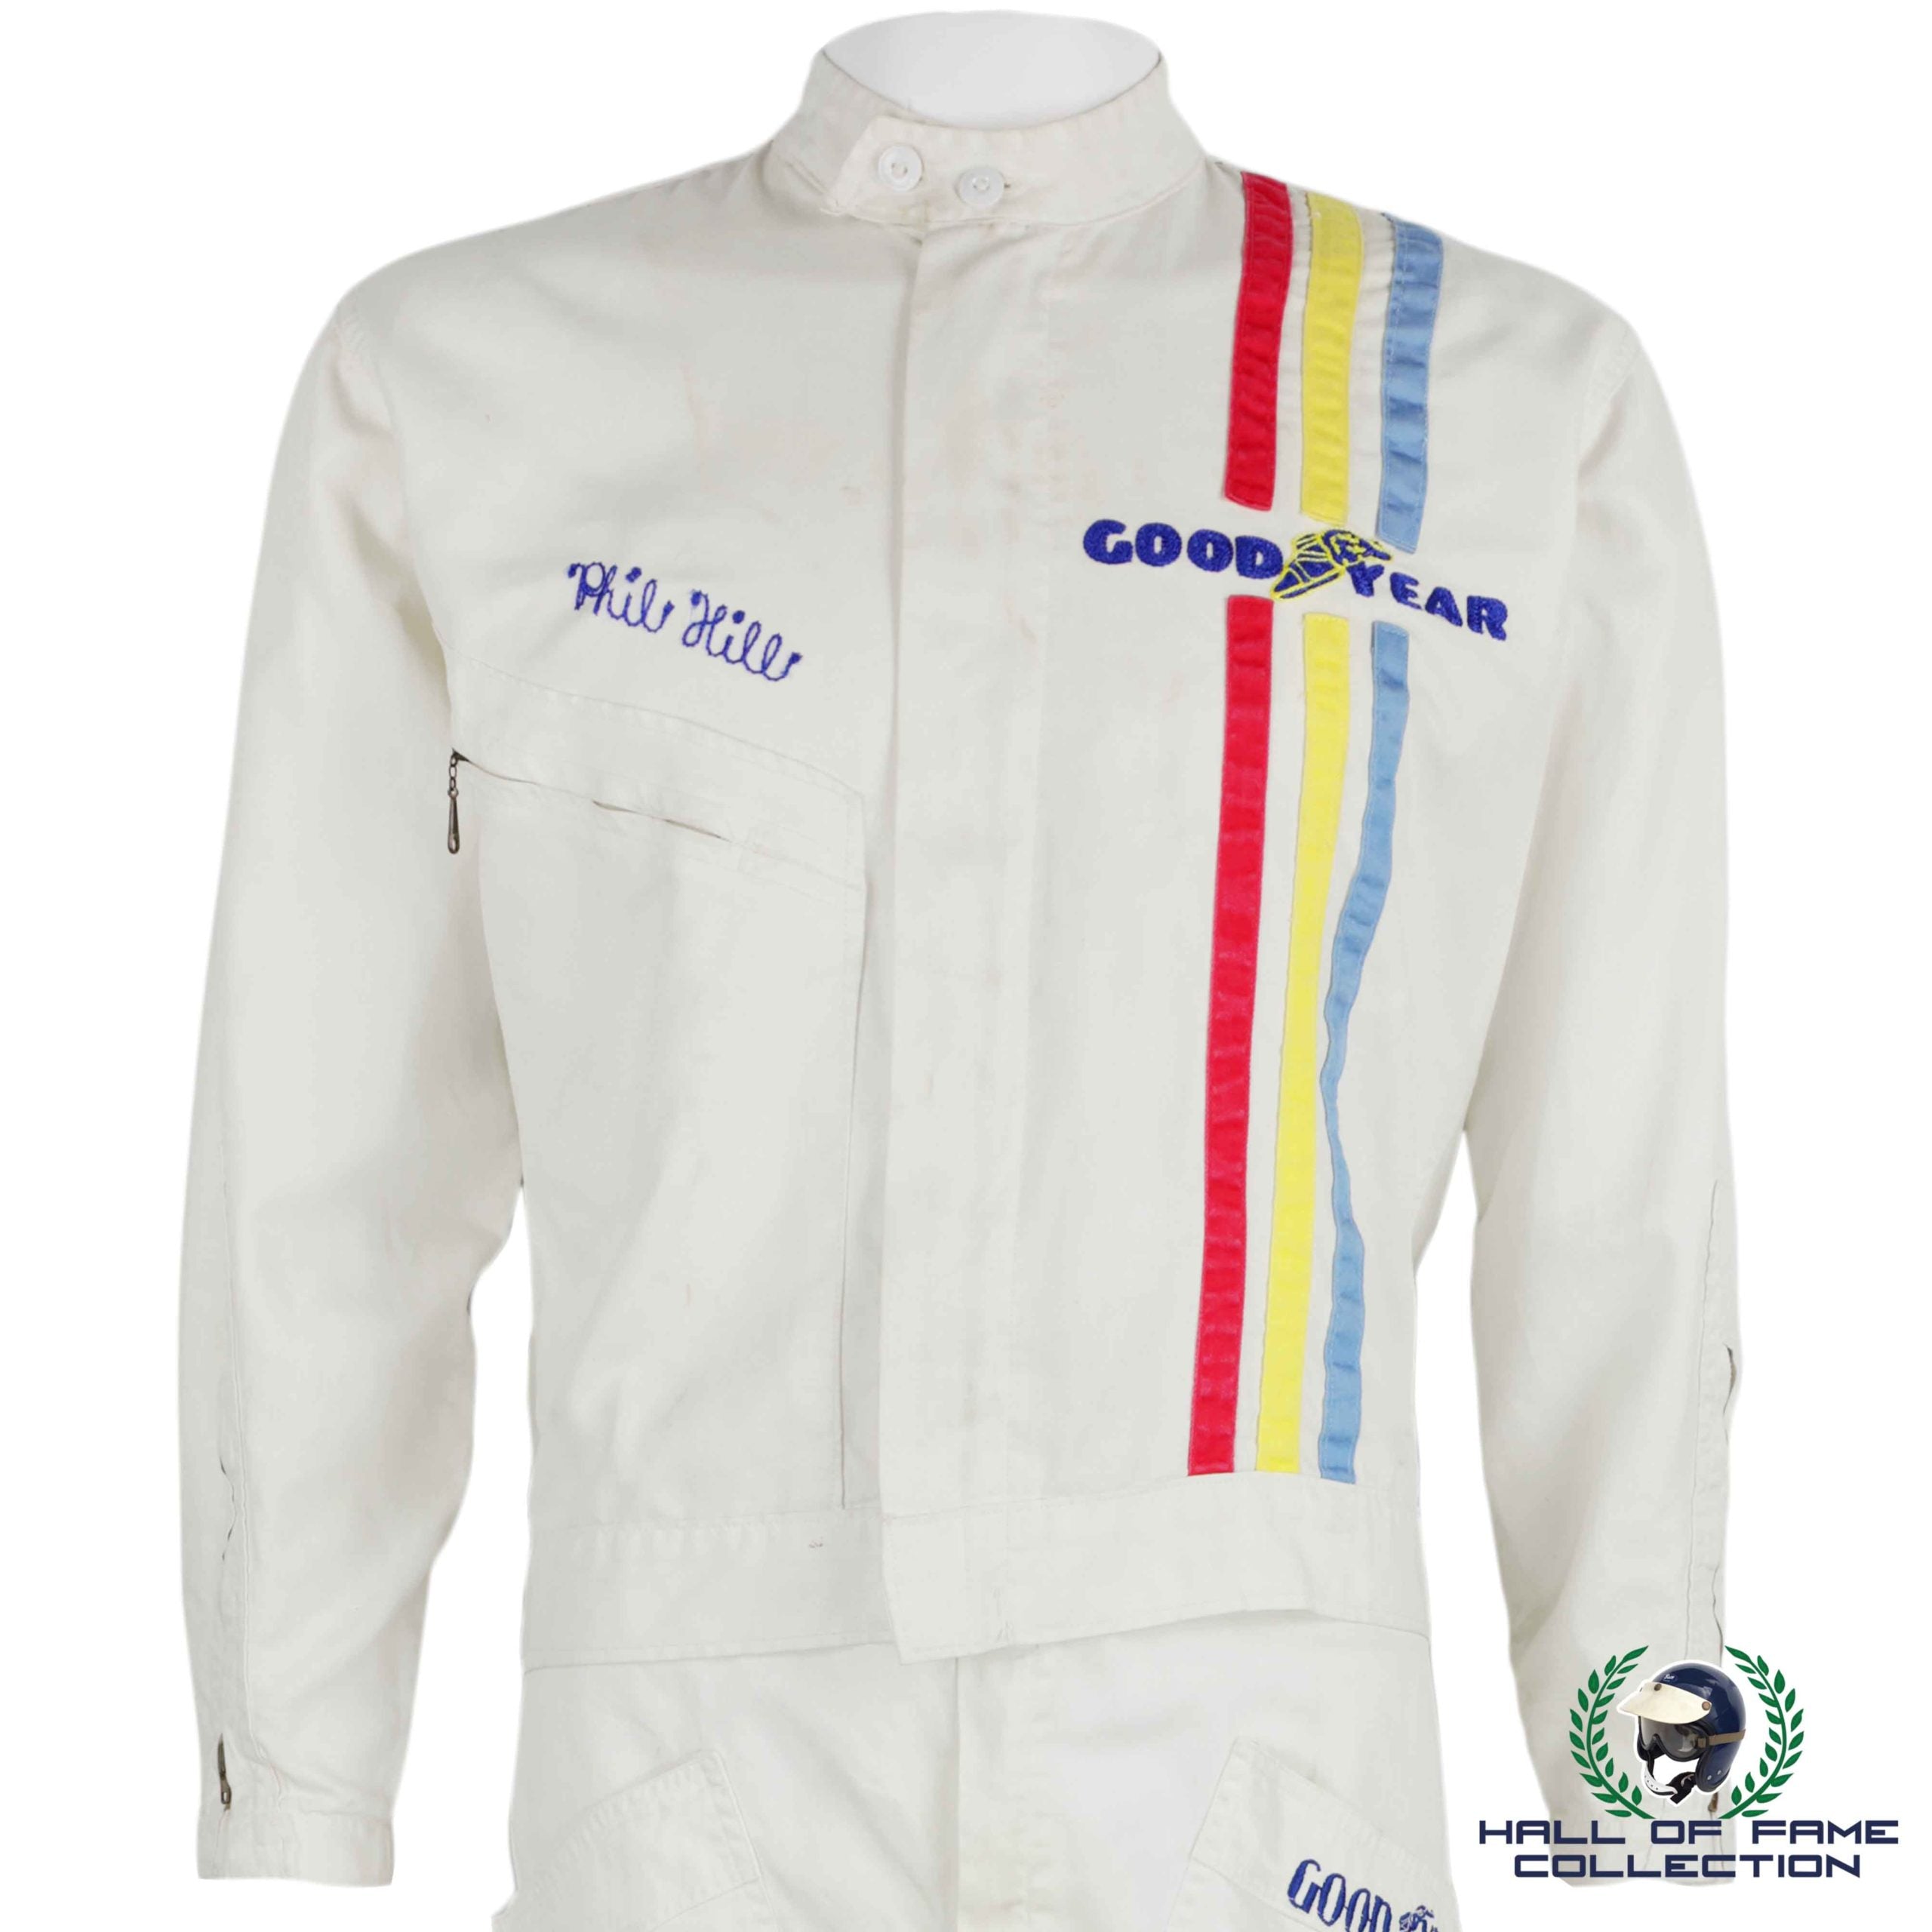 1965 Phil Hill "America's First F1 Champion" Race Used Shelby American Hinchman Suit